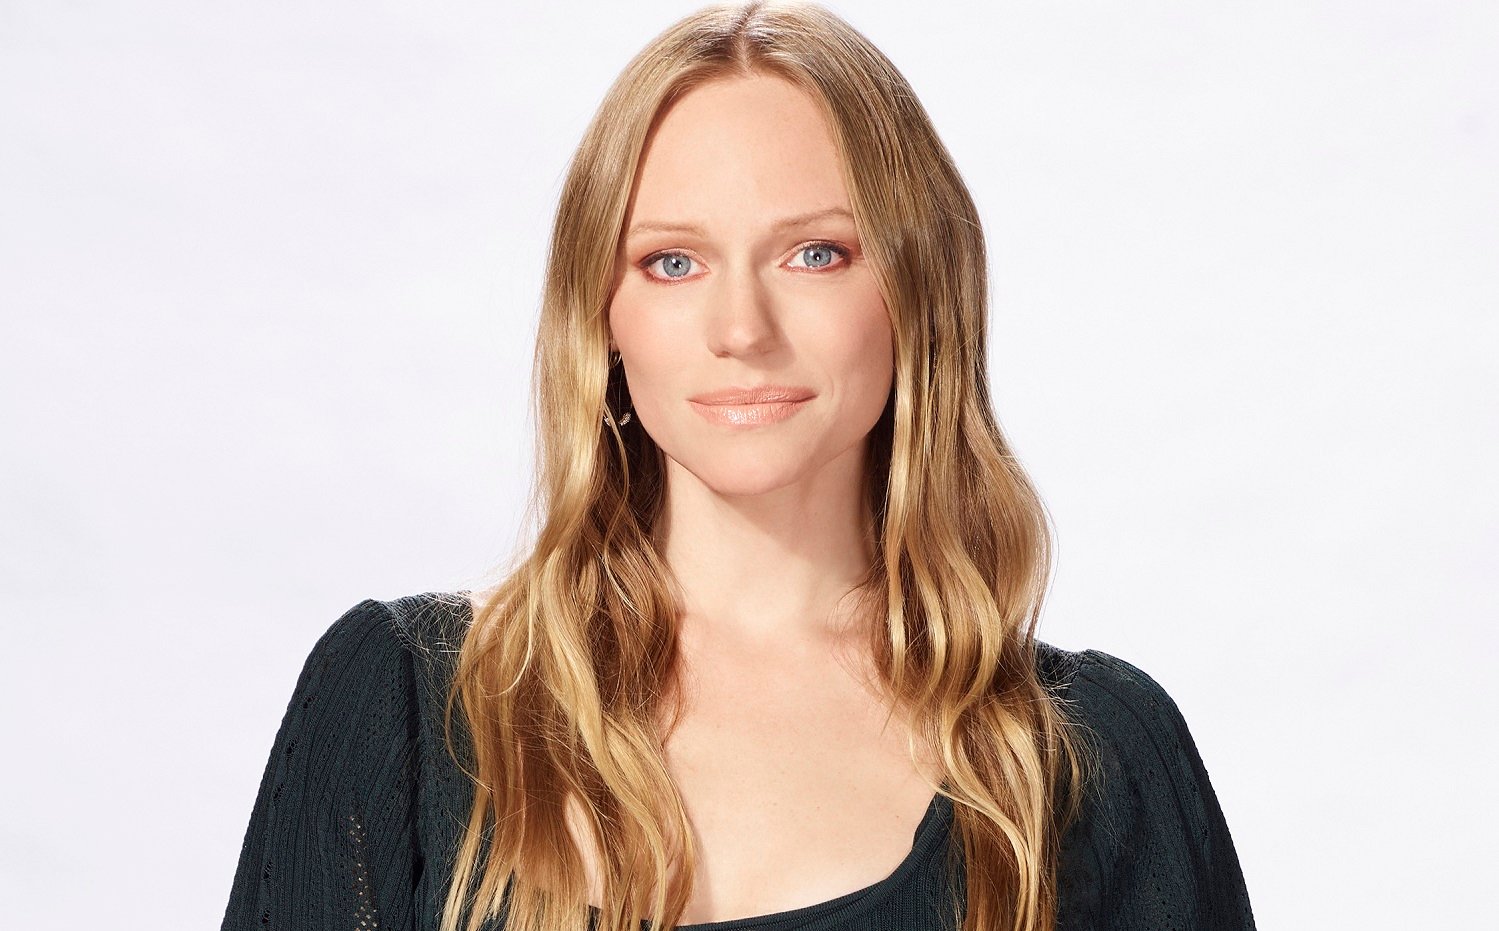 Days of Our Lives star Marci Miller is pictured here in a black scooped neck shirt against a white background